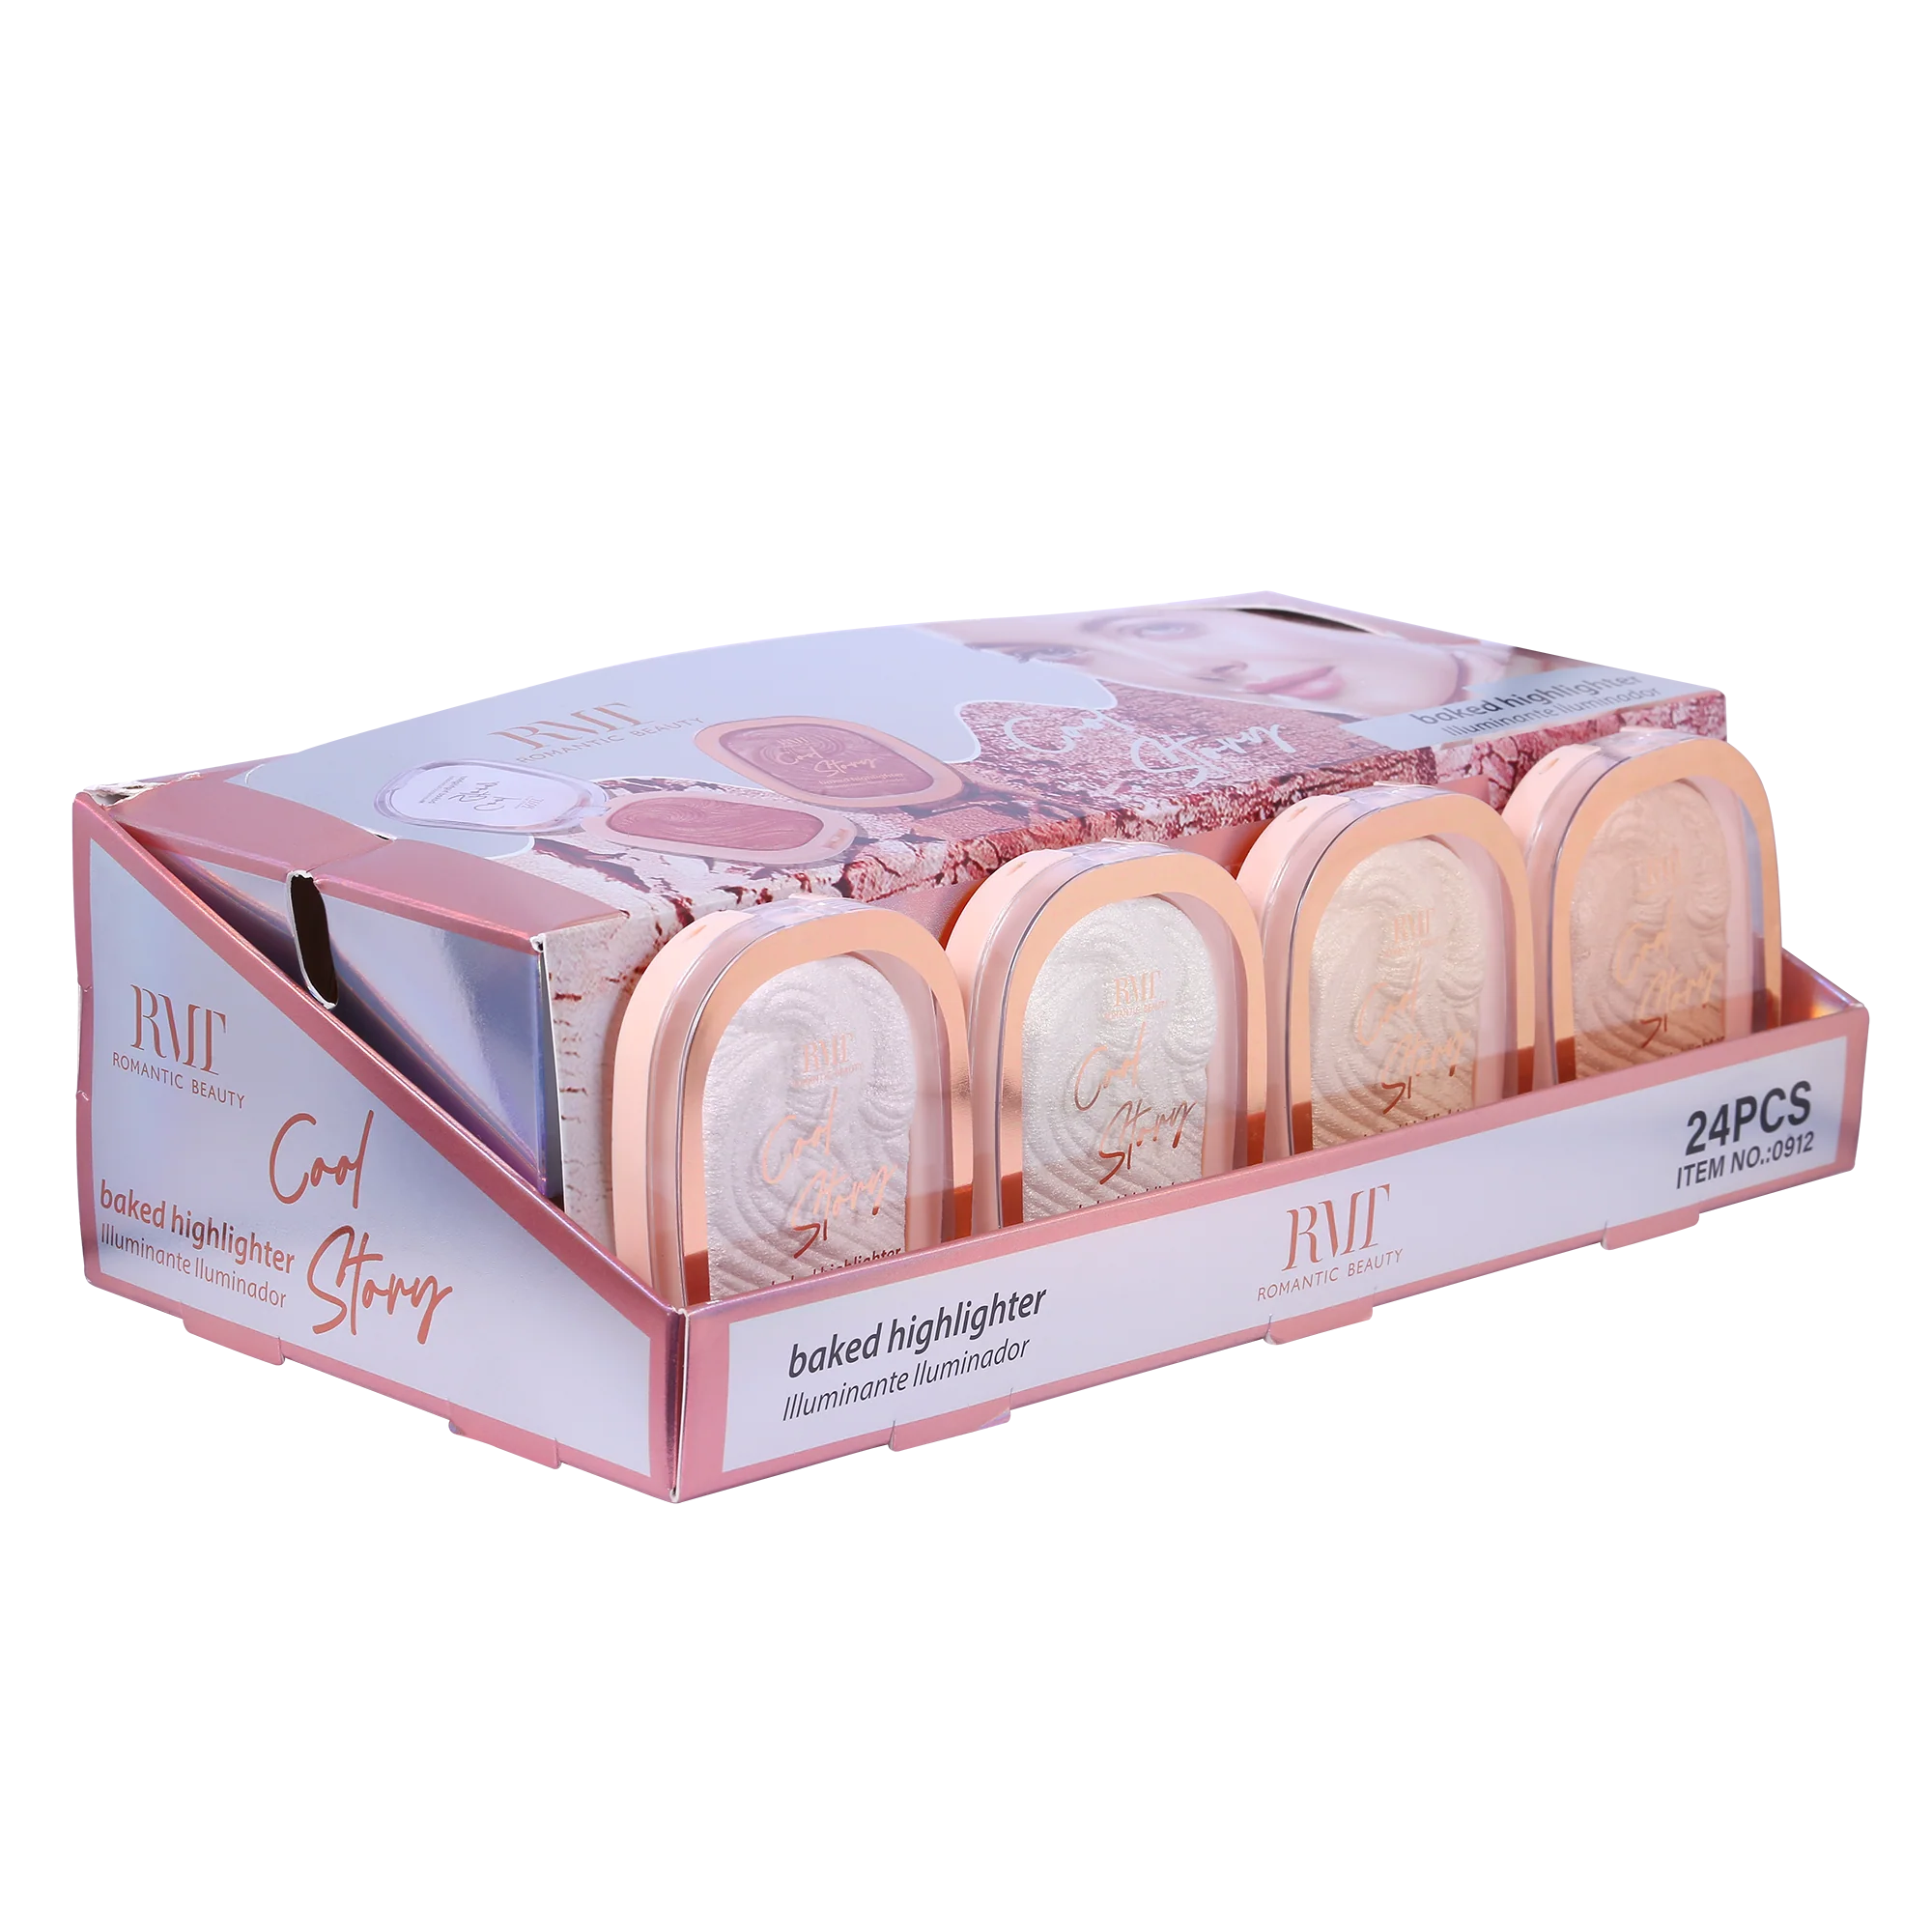 ROMANTIC BEAUTY - COOL STORY BAKED HIGHLIGHTER - (DISPLAY 24 PCS)